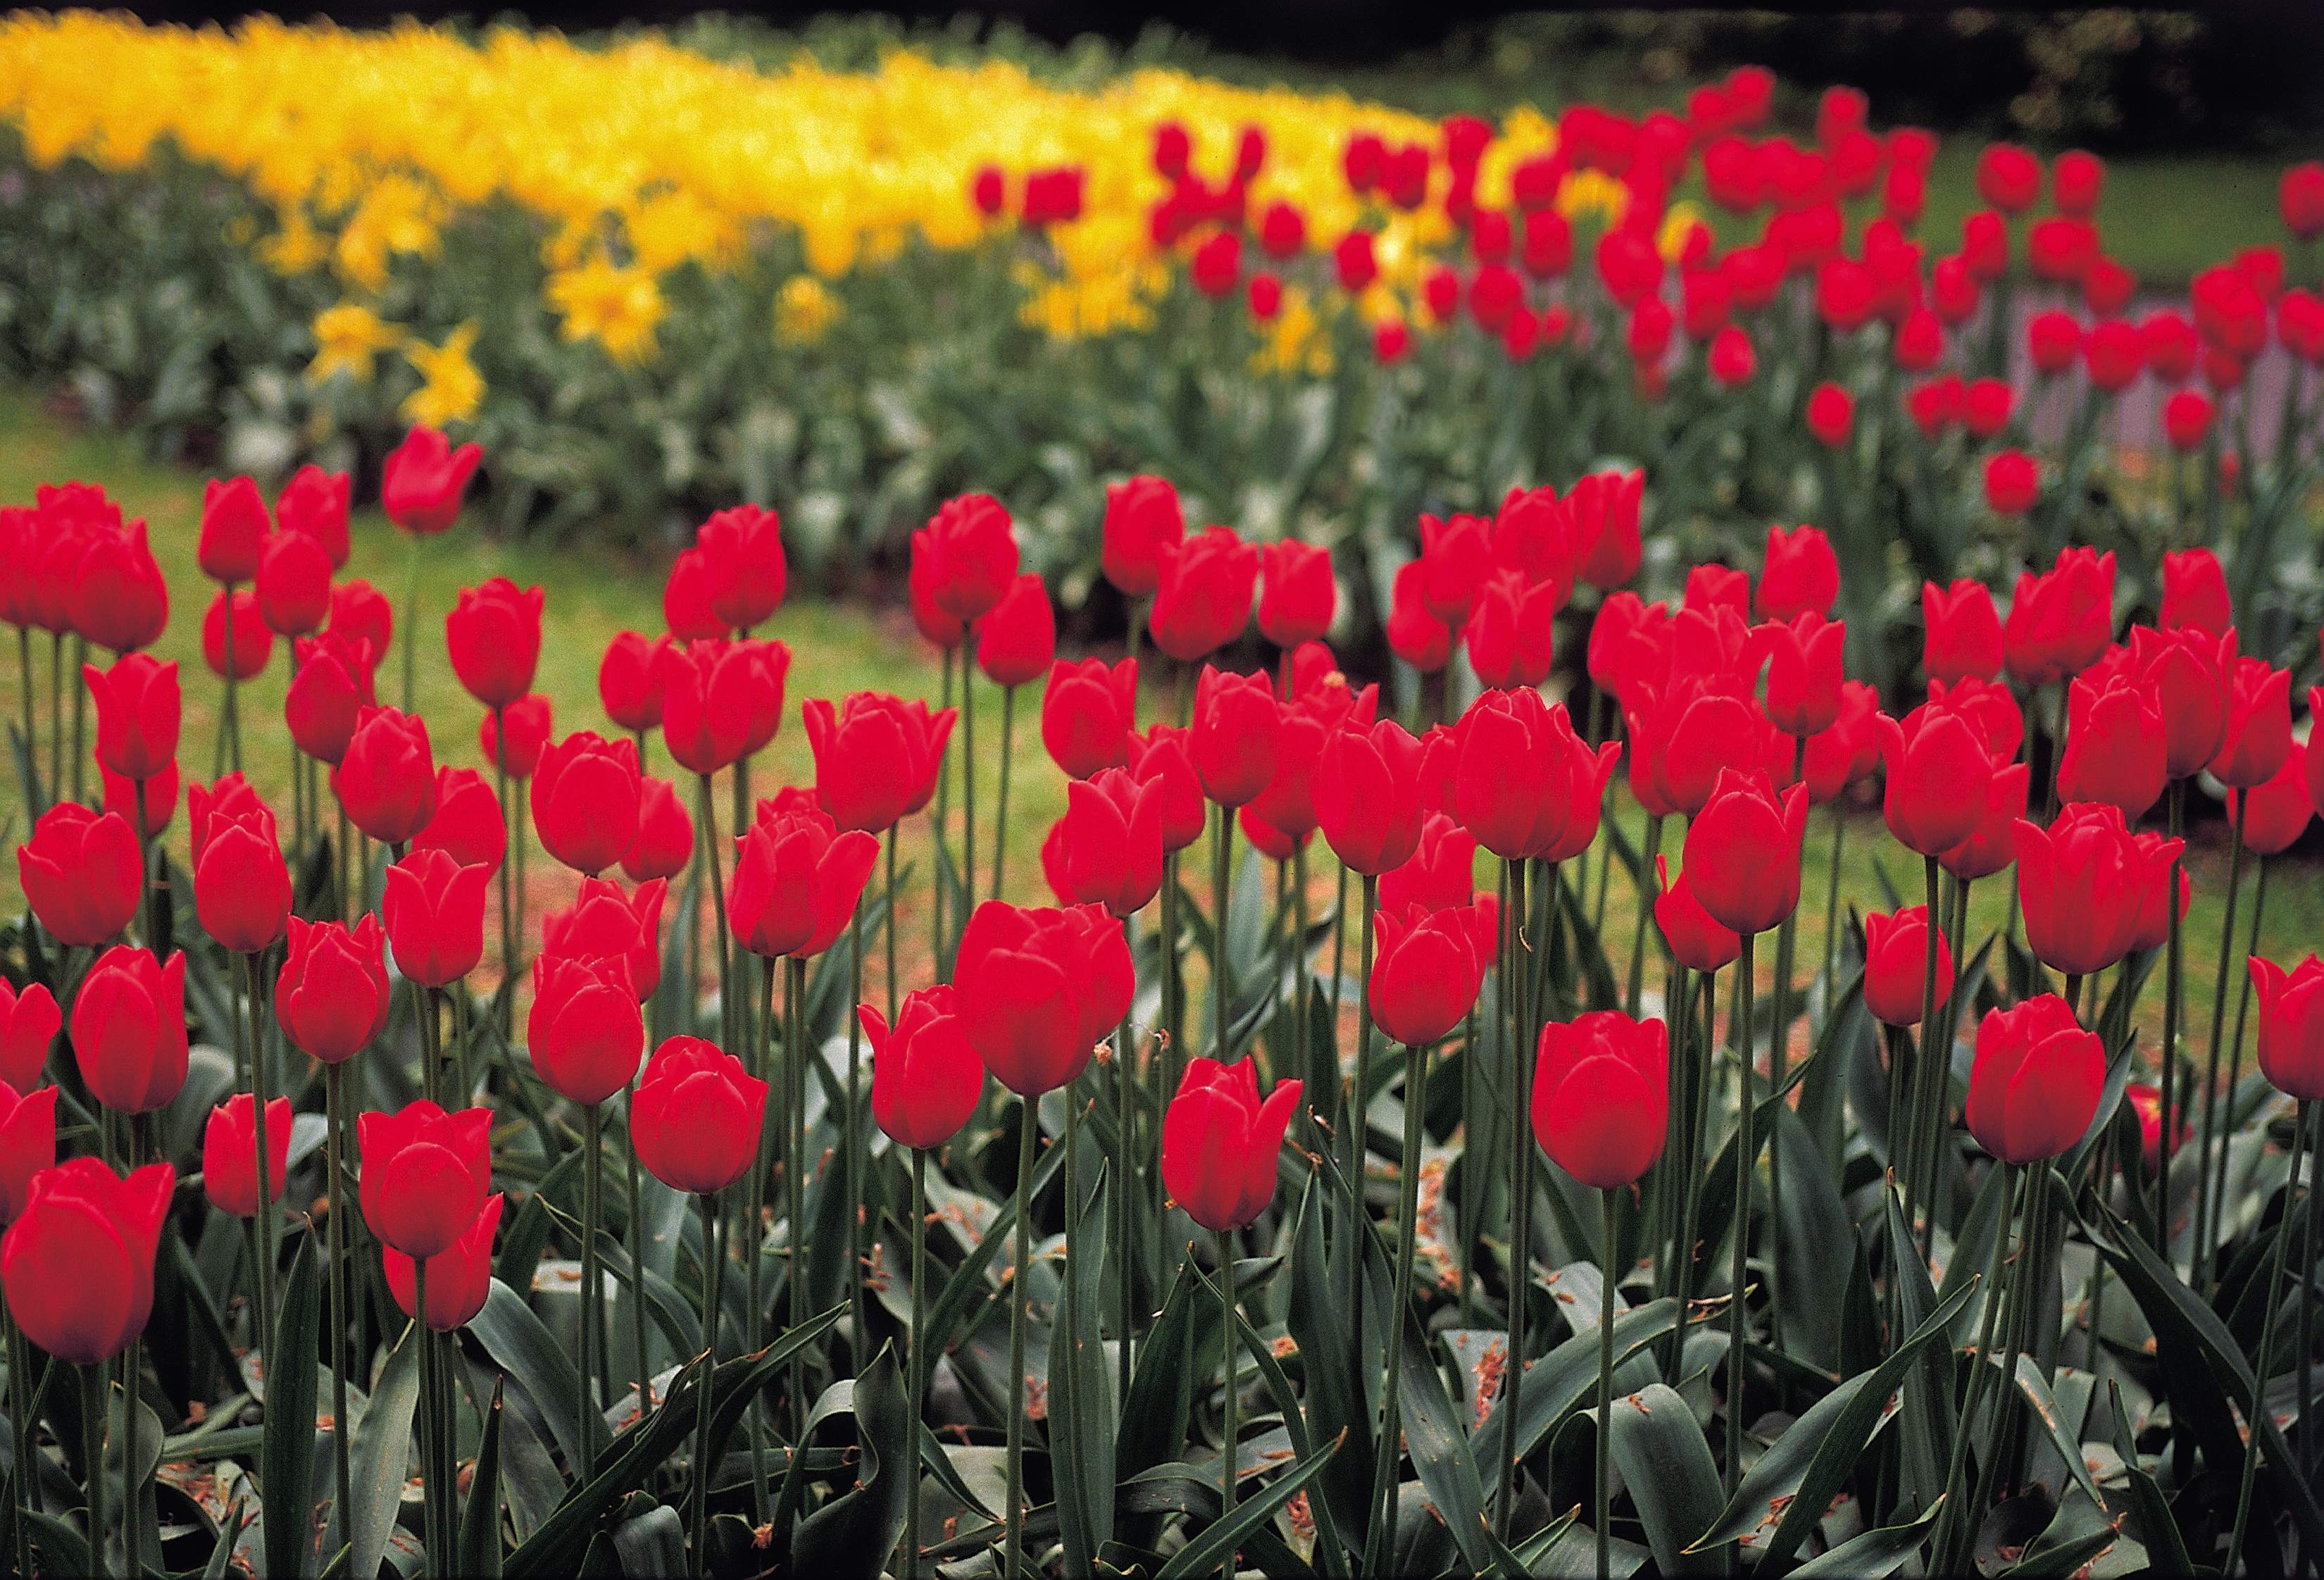 Flower beds containing a mix of red and yellow tulips around a grass lawn.